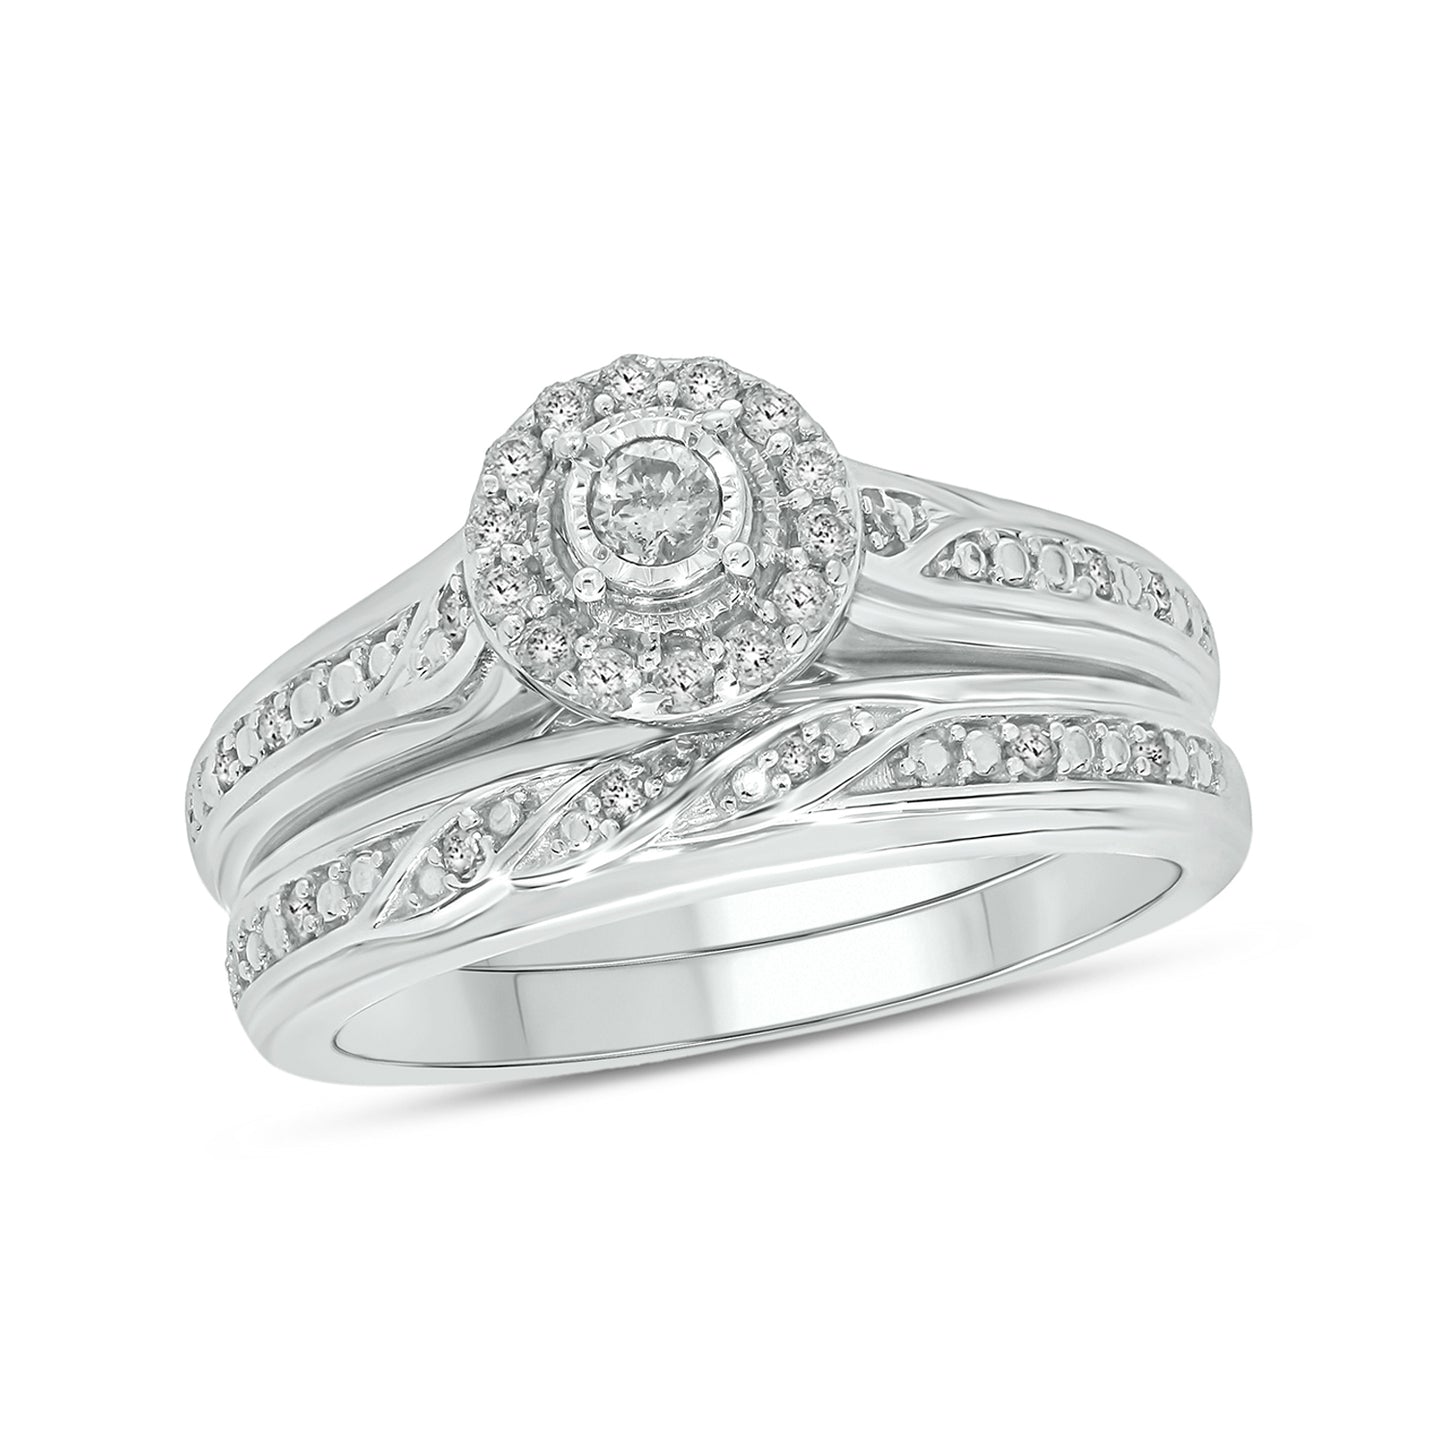 Exquisite Wedding Ring Set in Sterling Silver, Authentic Natural Diamonds